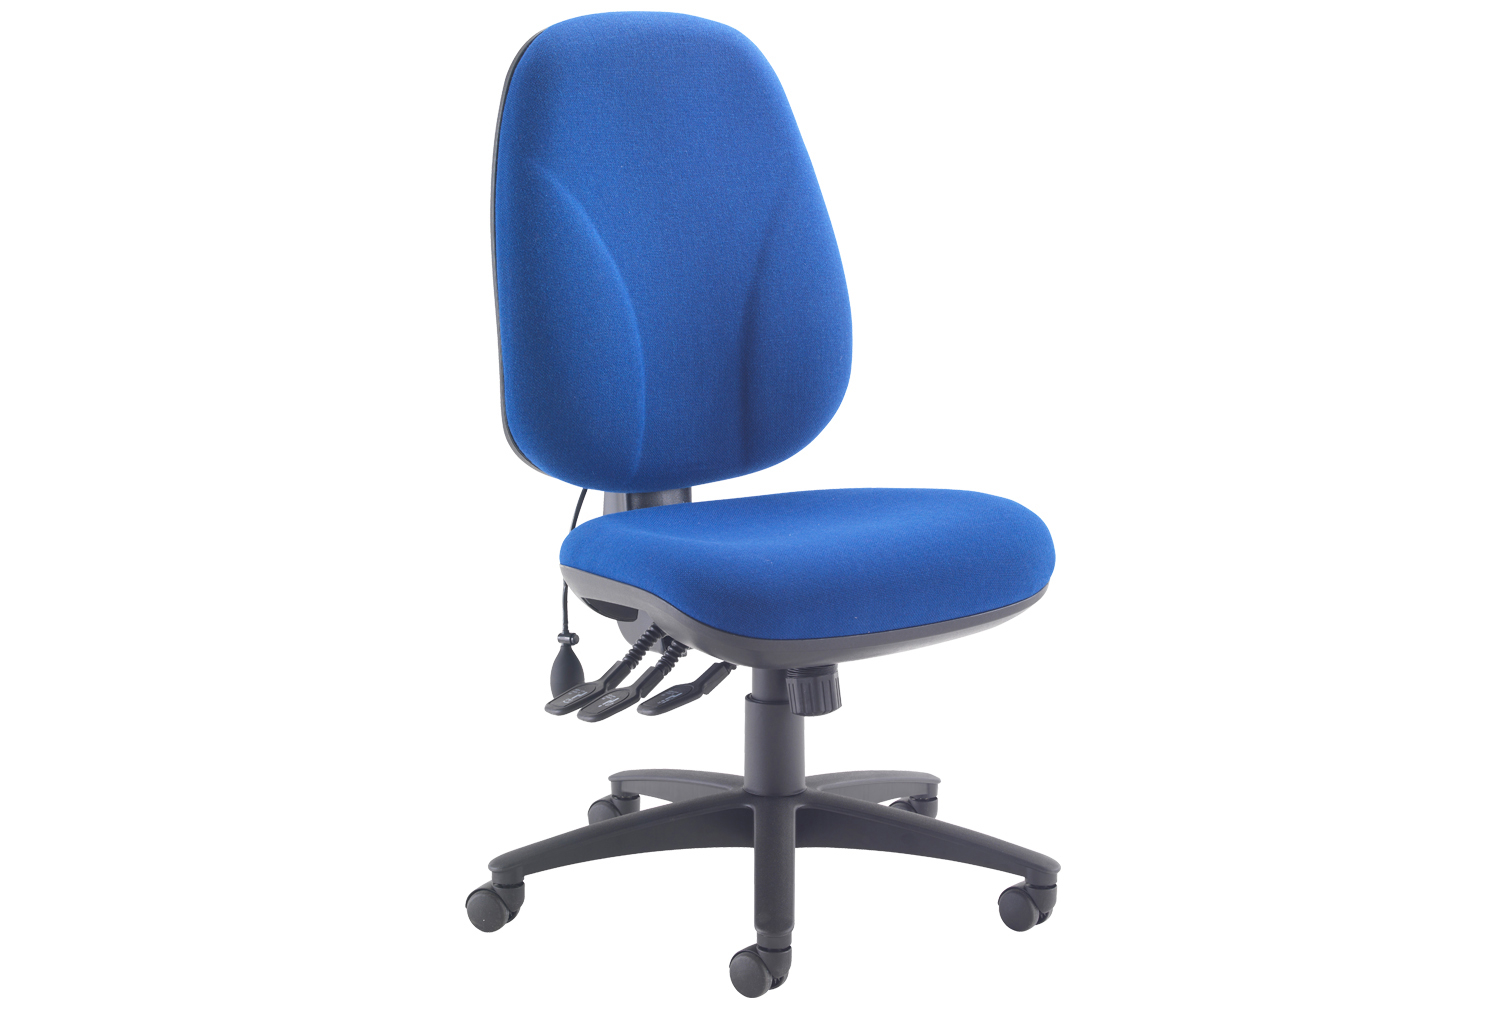 Orchid Deluxe Lumbar Pump Ergonomic Operator Office Chair, Blue, Express Delivery